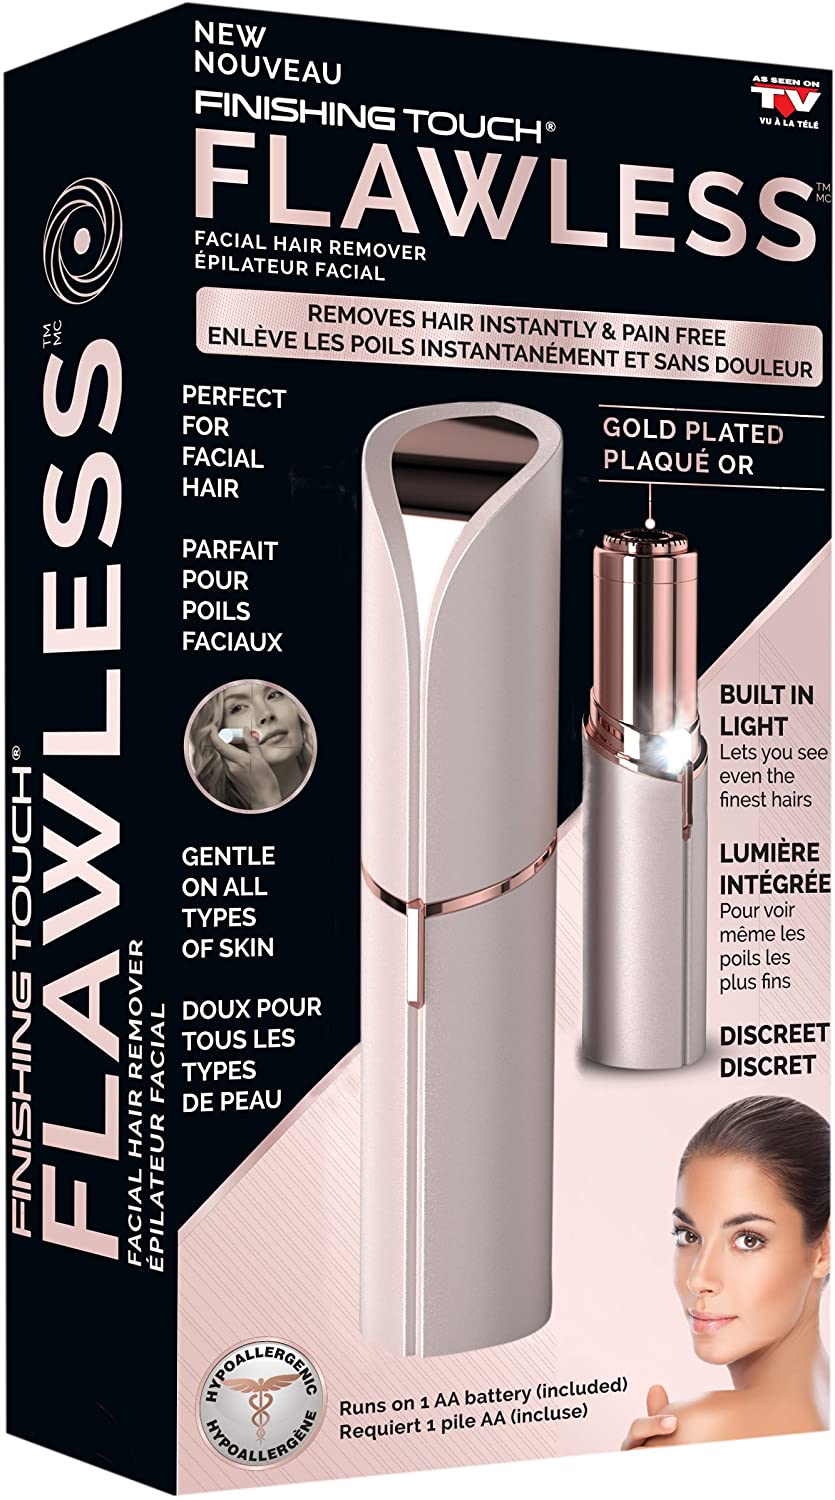 Finishing Touch Flawless : Buy Finishing Touch Flawless Facial Trimmer ...